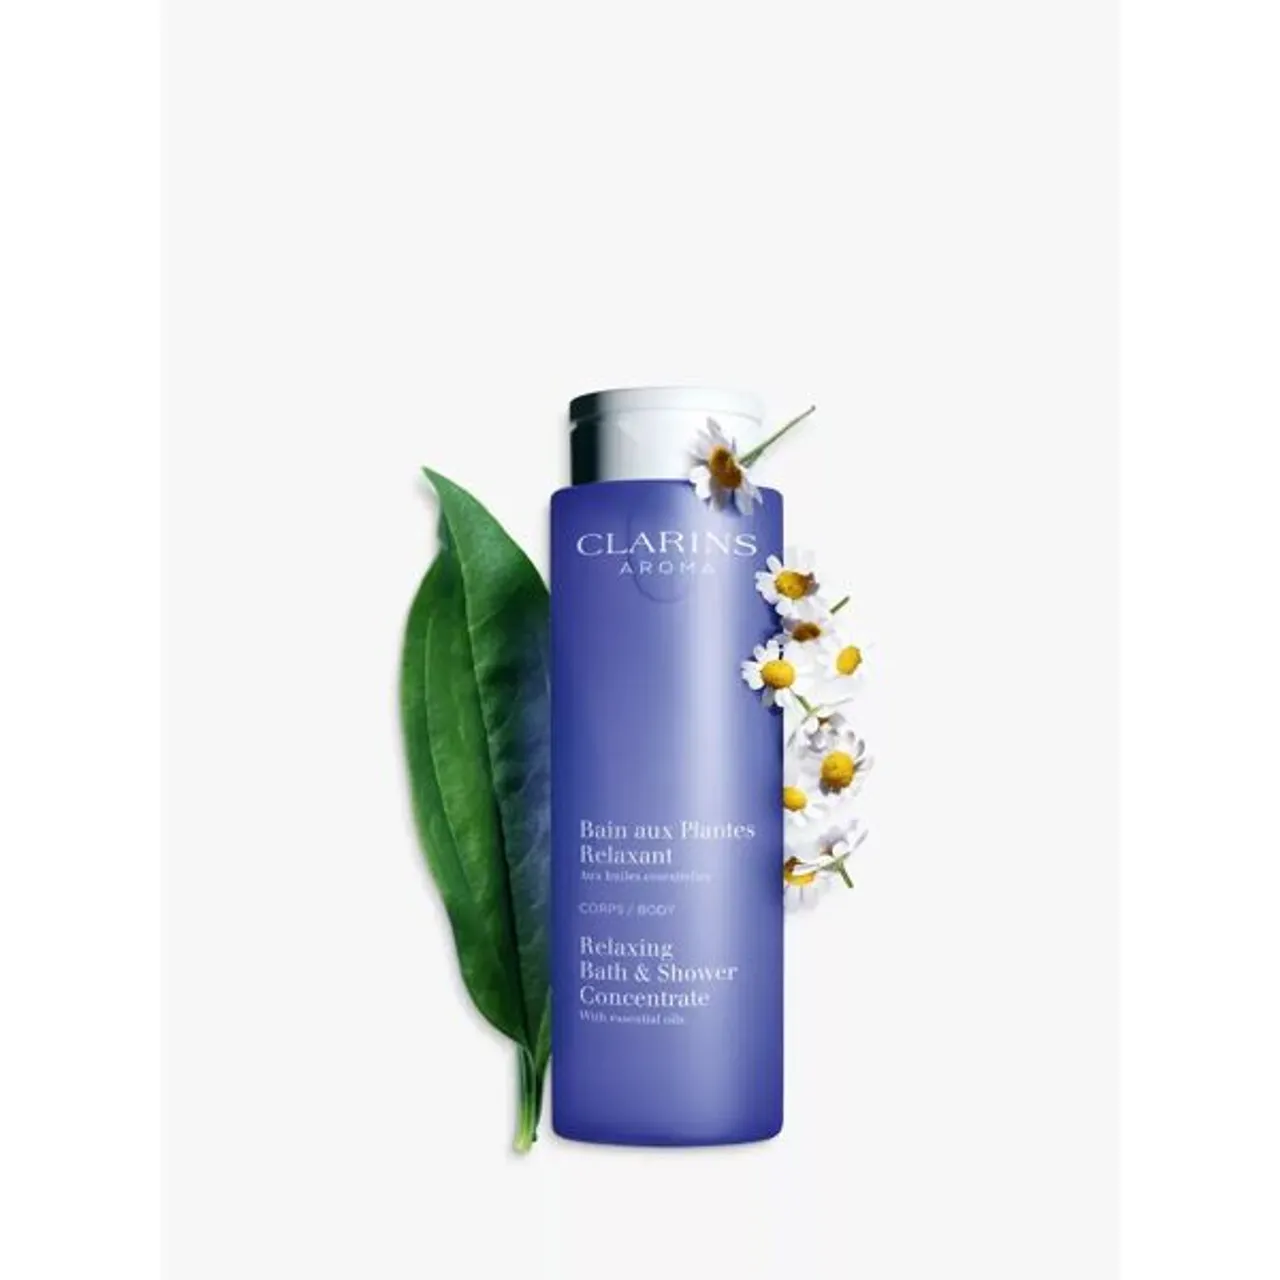 Clarins Relaxing Bath & Shower Concentrate, 200ml - Unisex - Size: 200ml